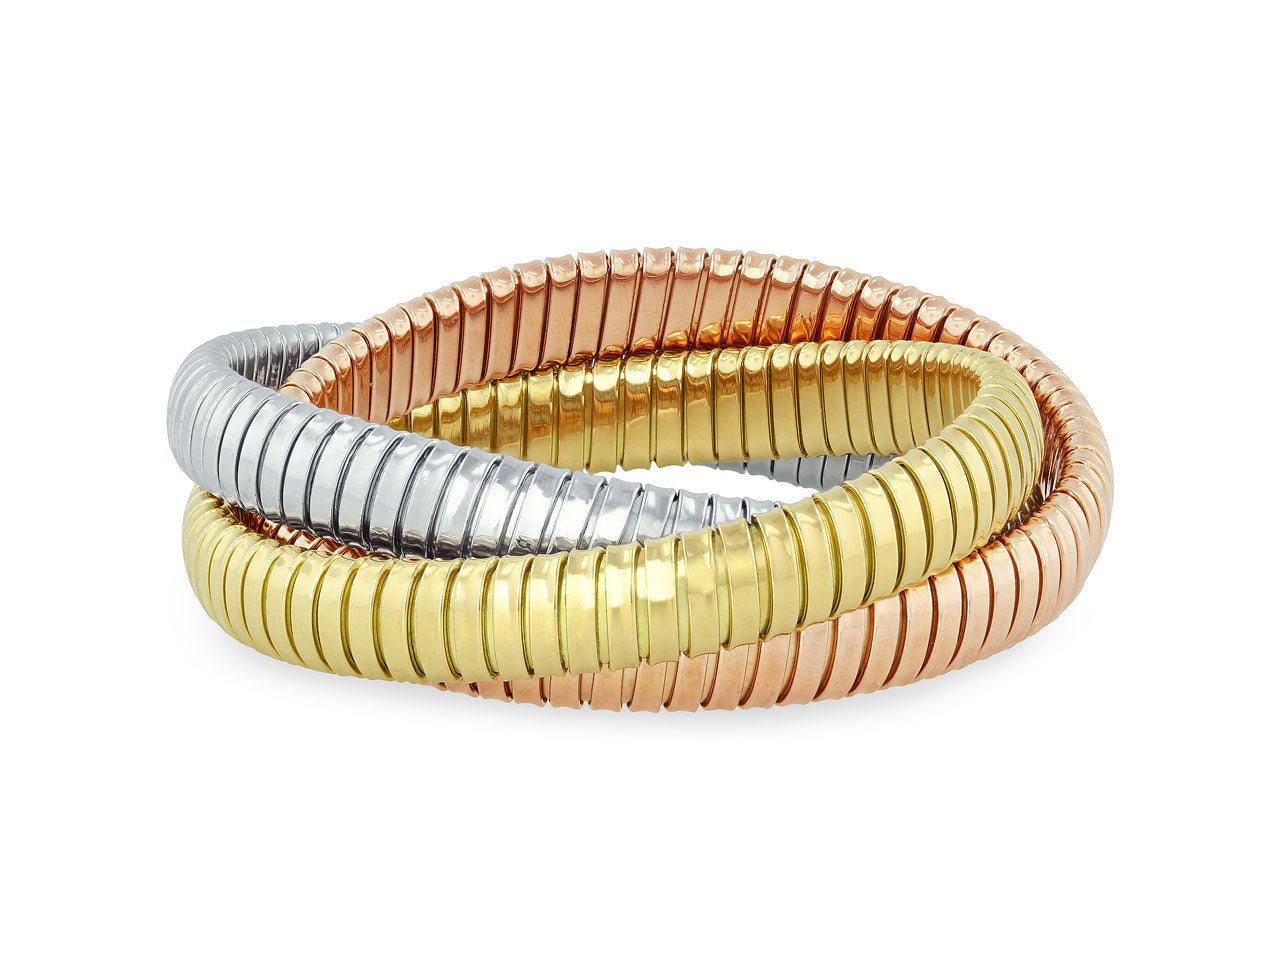 Rolling Bracelet in 18K Yellow, White and Rose Gold, 9mm, by Beladora